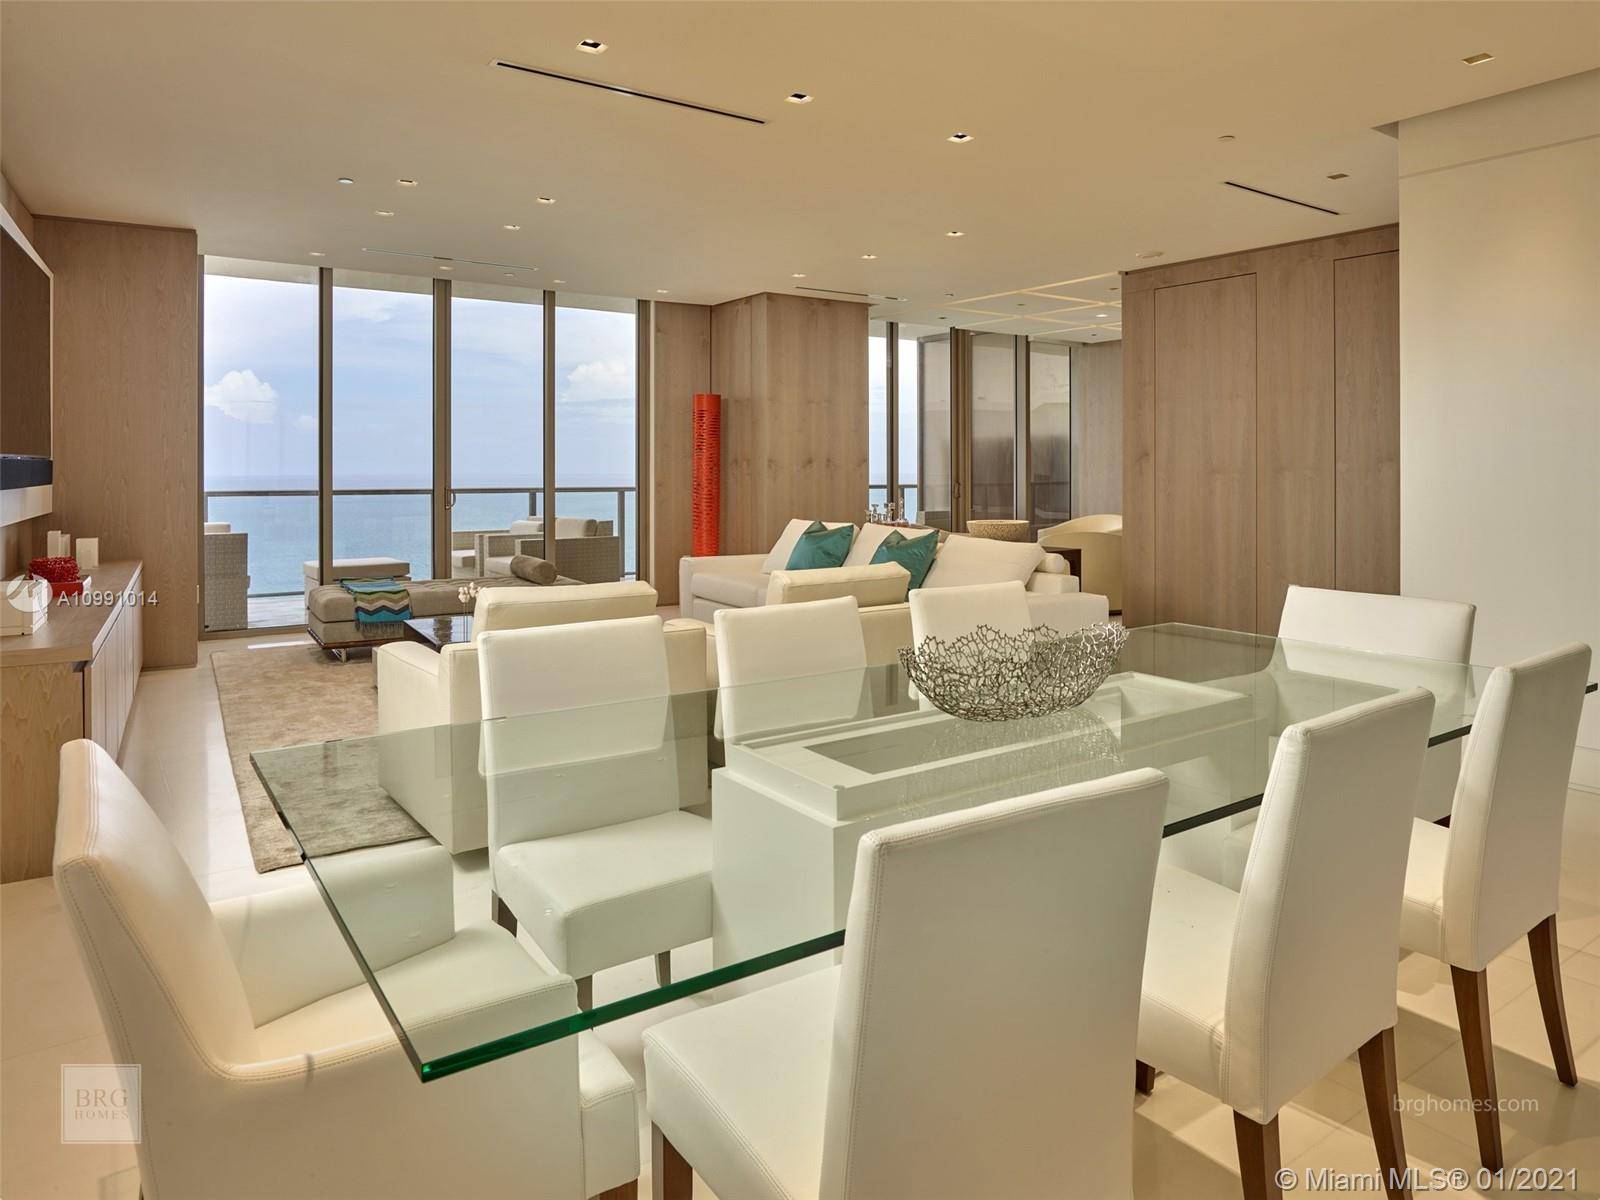 Immaculate Penthouse Residence available for Lease at St Regis Bal Harbour.